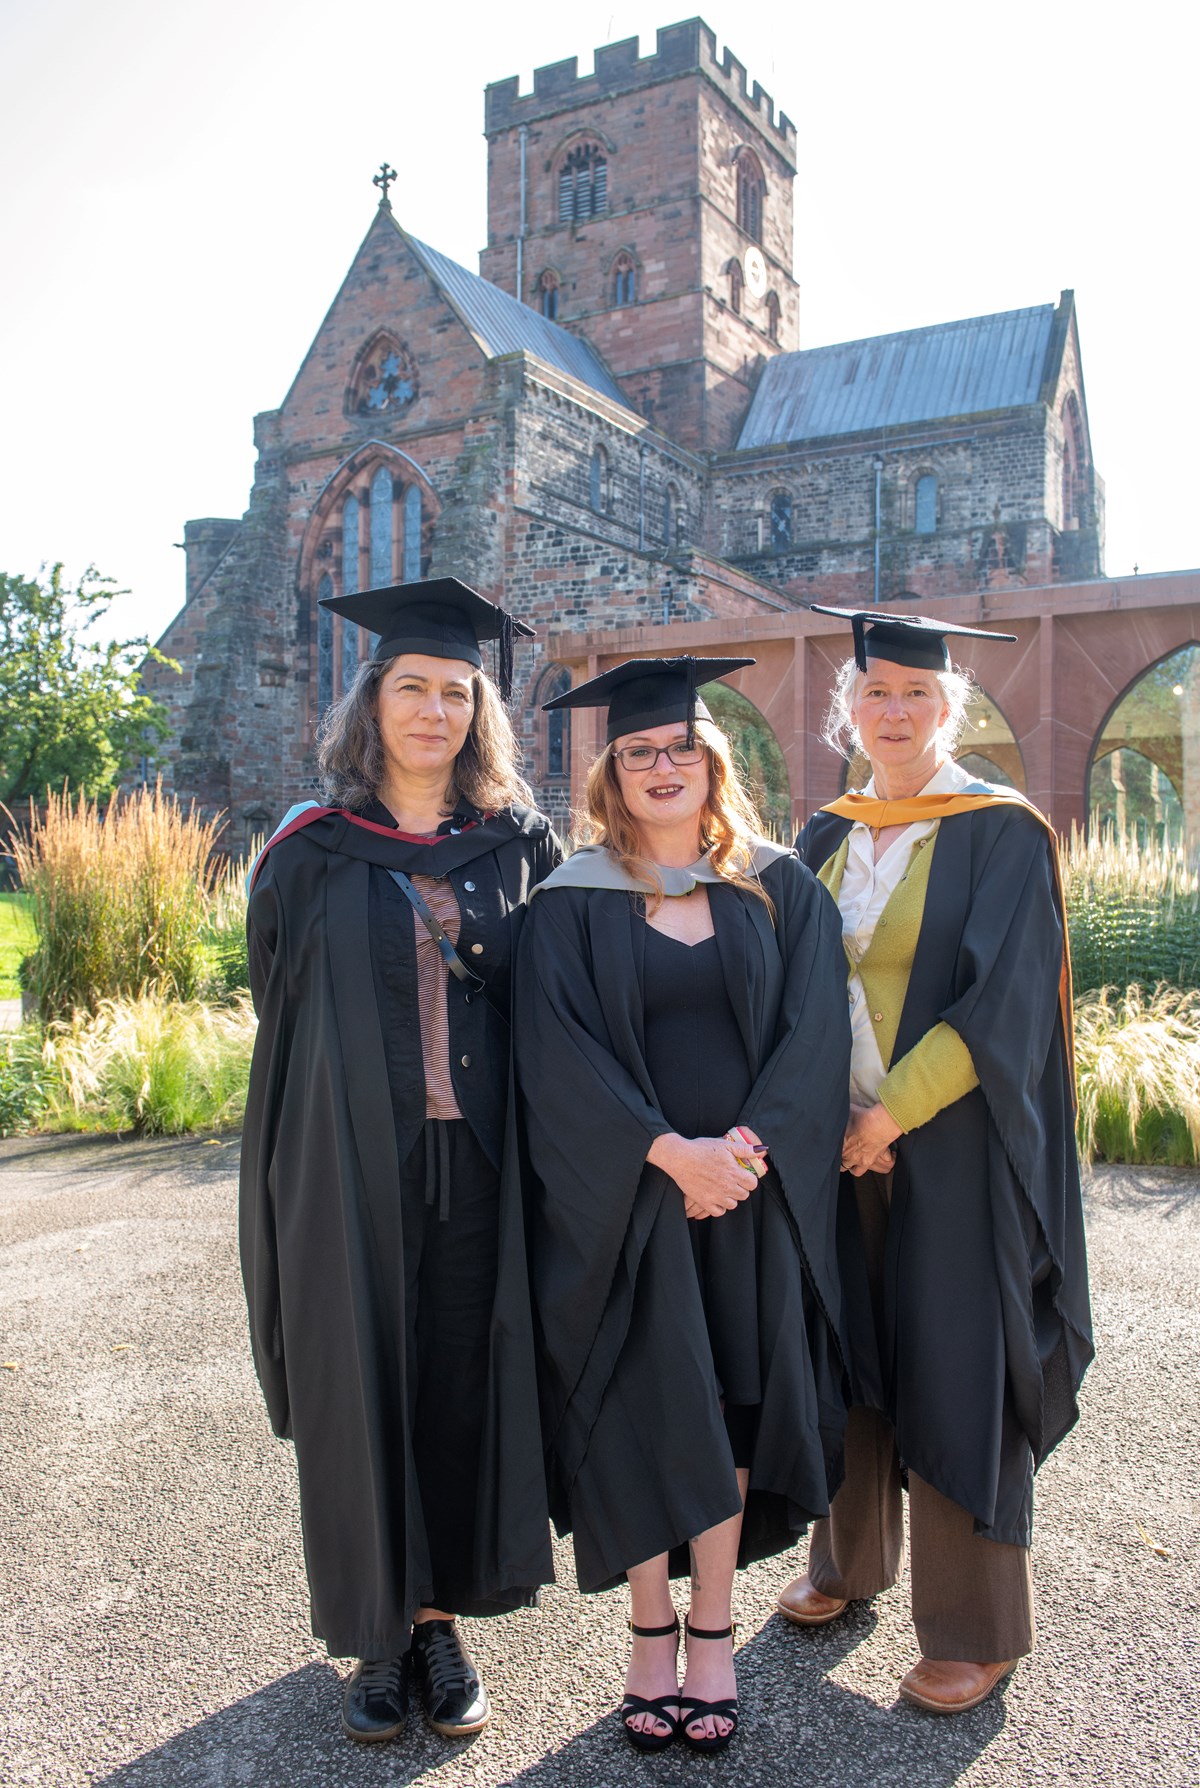 Law graduate Elizabeth Molloy (centre) with LLB Law Course Co-leaders Fiona Buchanan (left) and Fiona Boyle (right).
Picture: University of Cumbria/Becker Photo